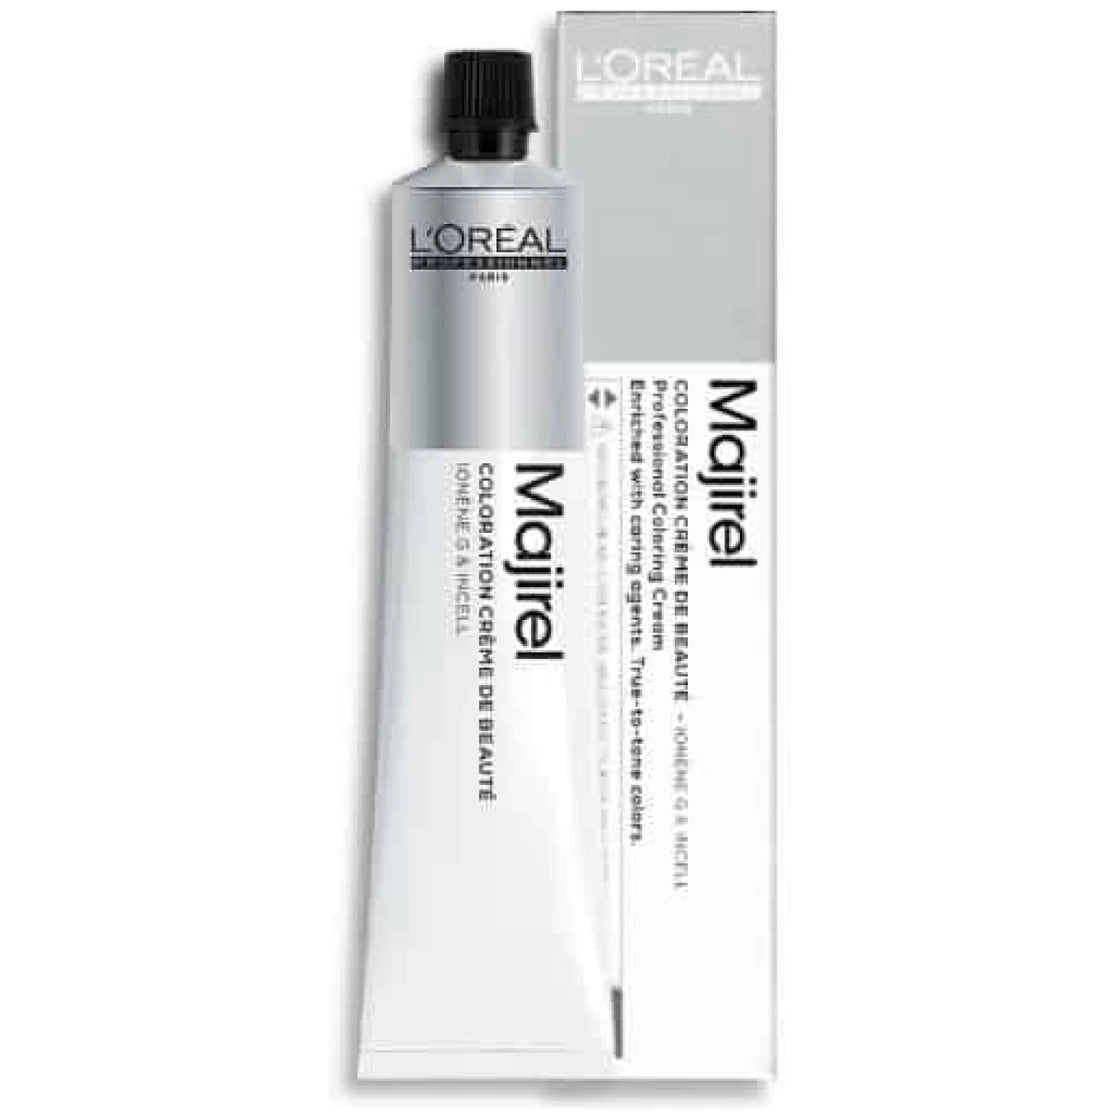 LOreal Professional Hair Care Salon results at home  wwwverbenaproductscom  Loreal hair Loreal Loréal professionnel